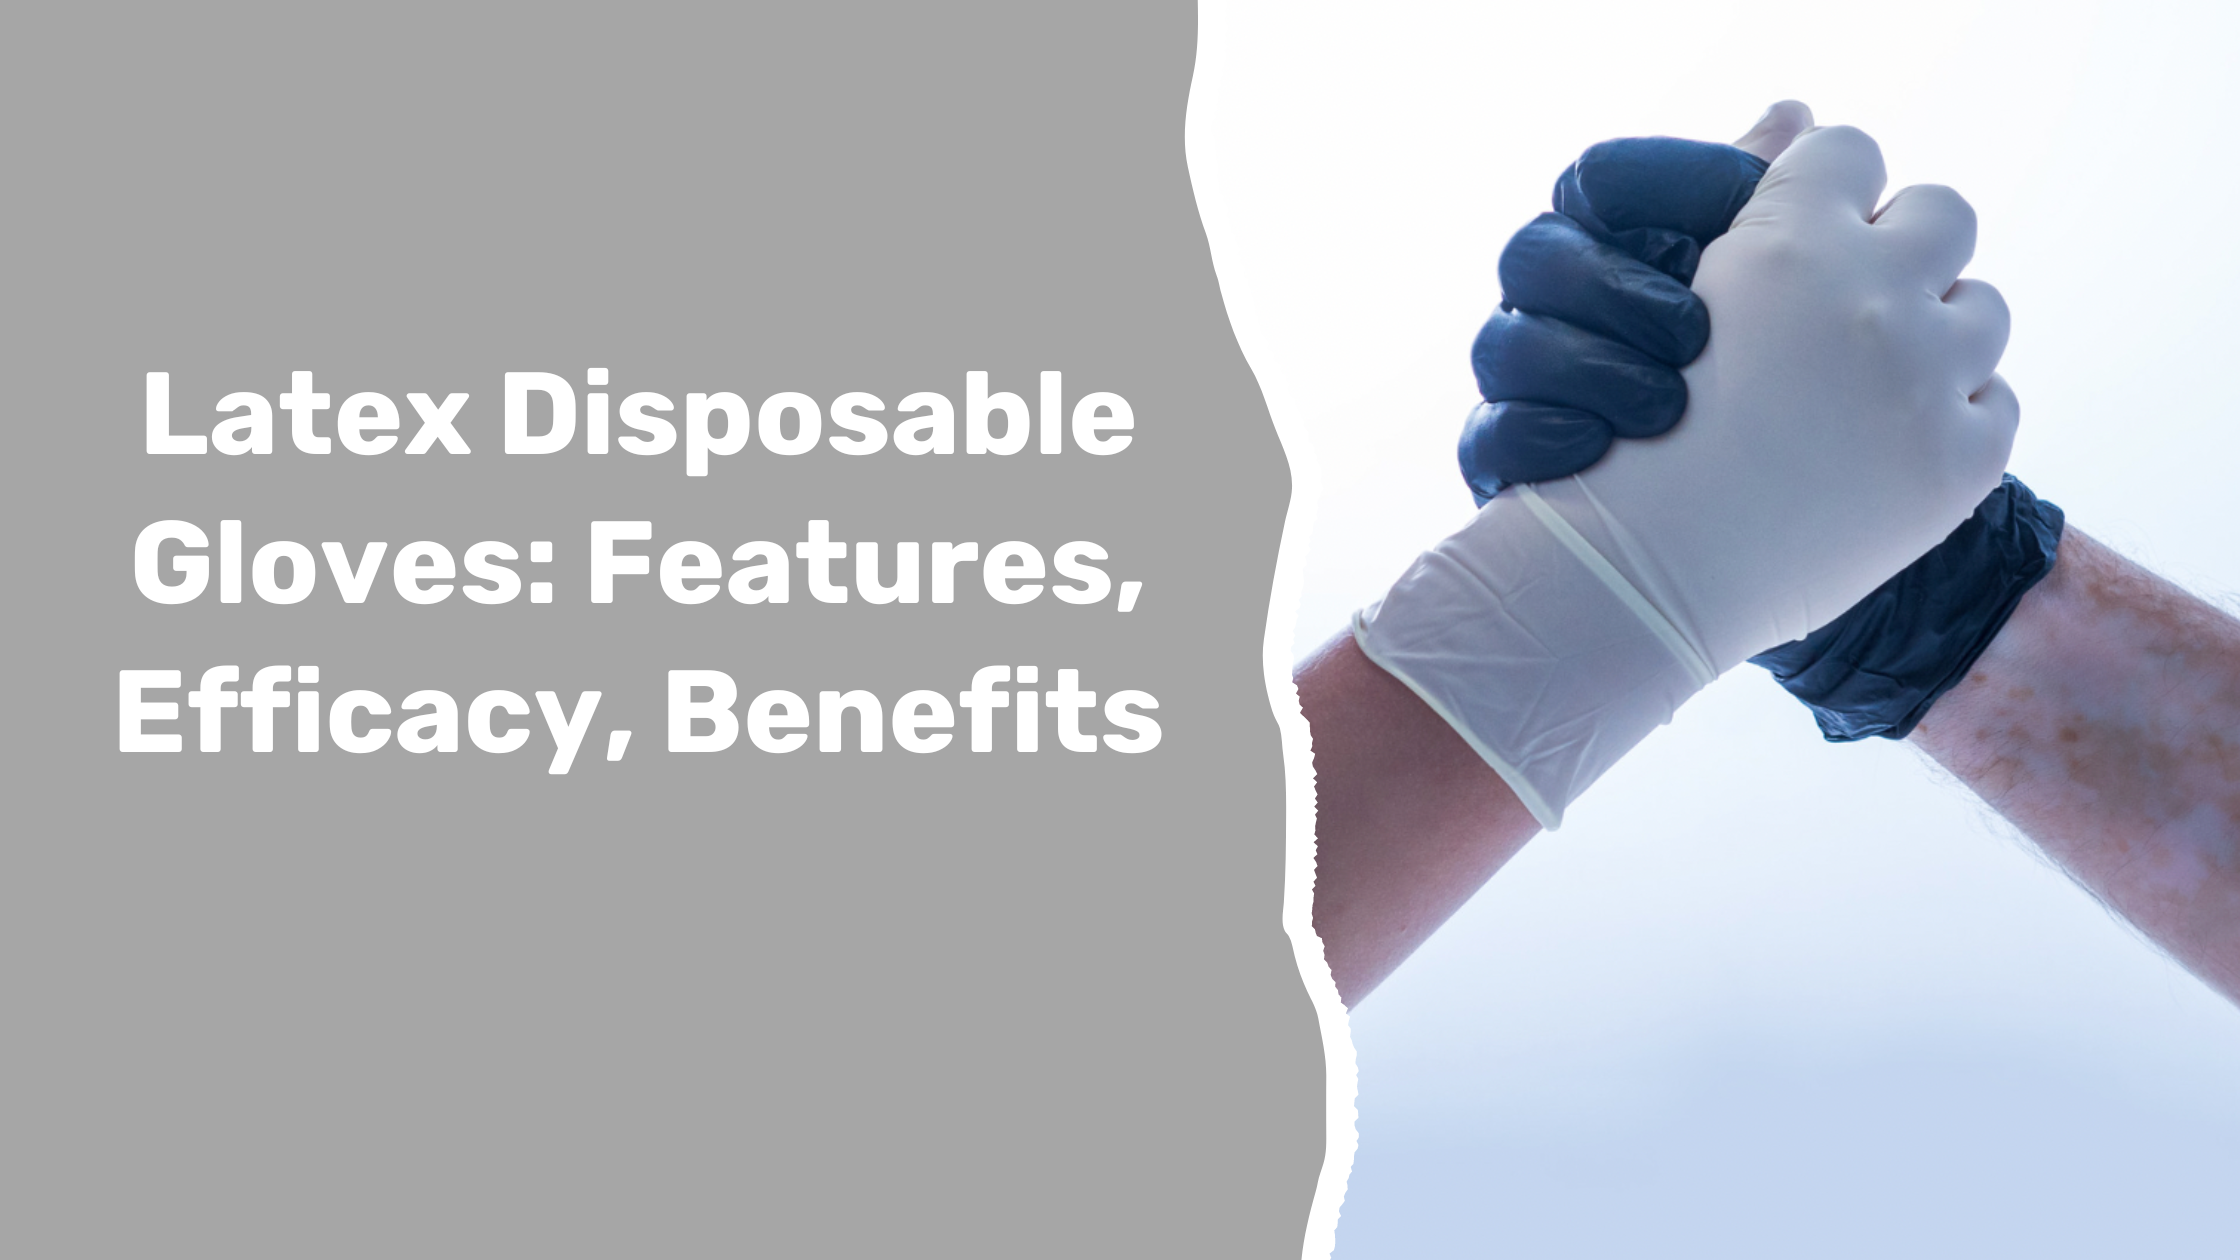 Latex Disposable Gloves: Features, Efficacy, Benefits